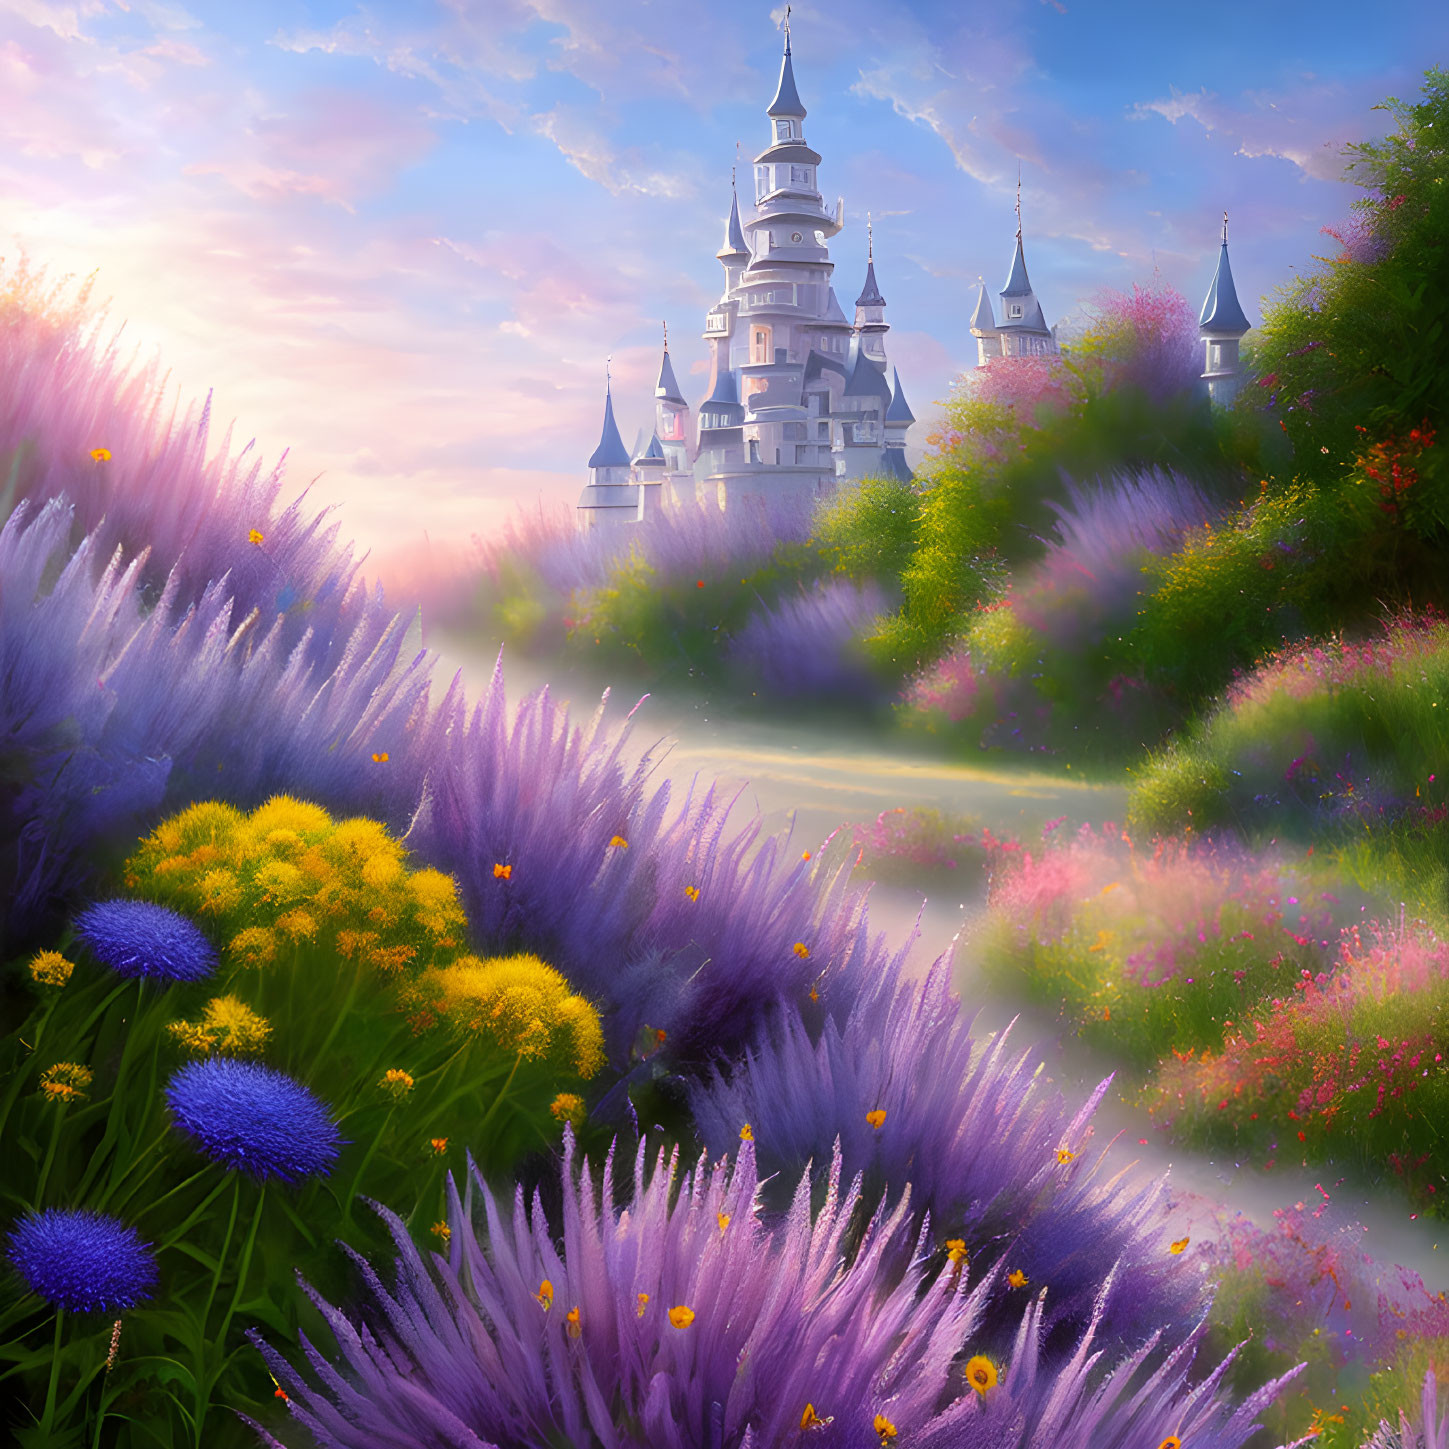 Fairytale Castle Surrounded by Purple and Pink Flowers at Sunrise